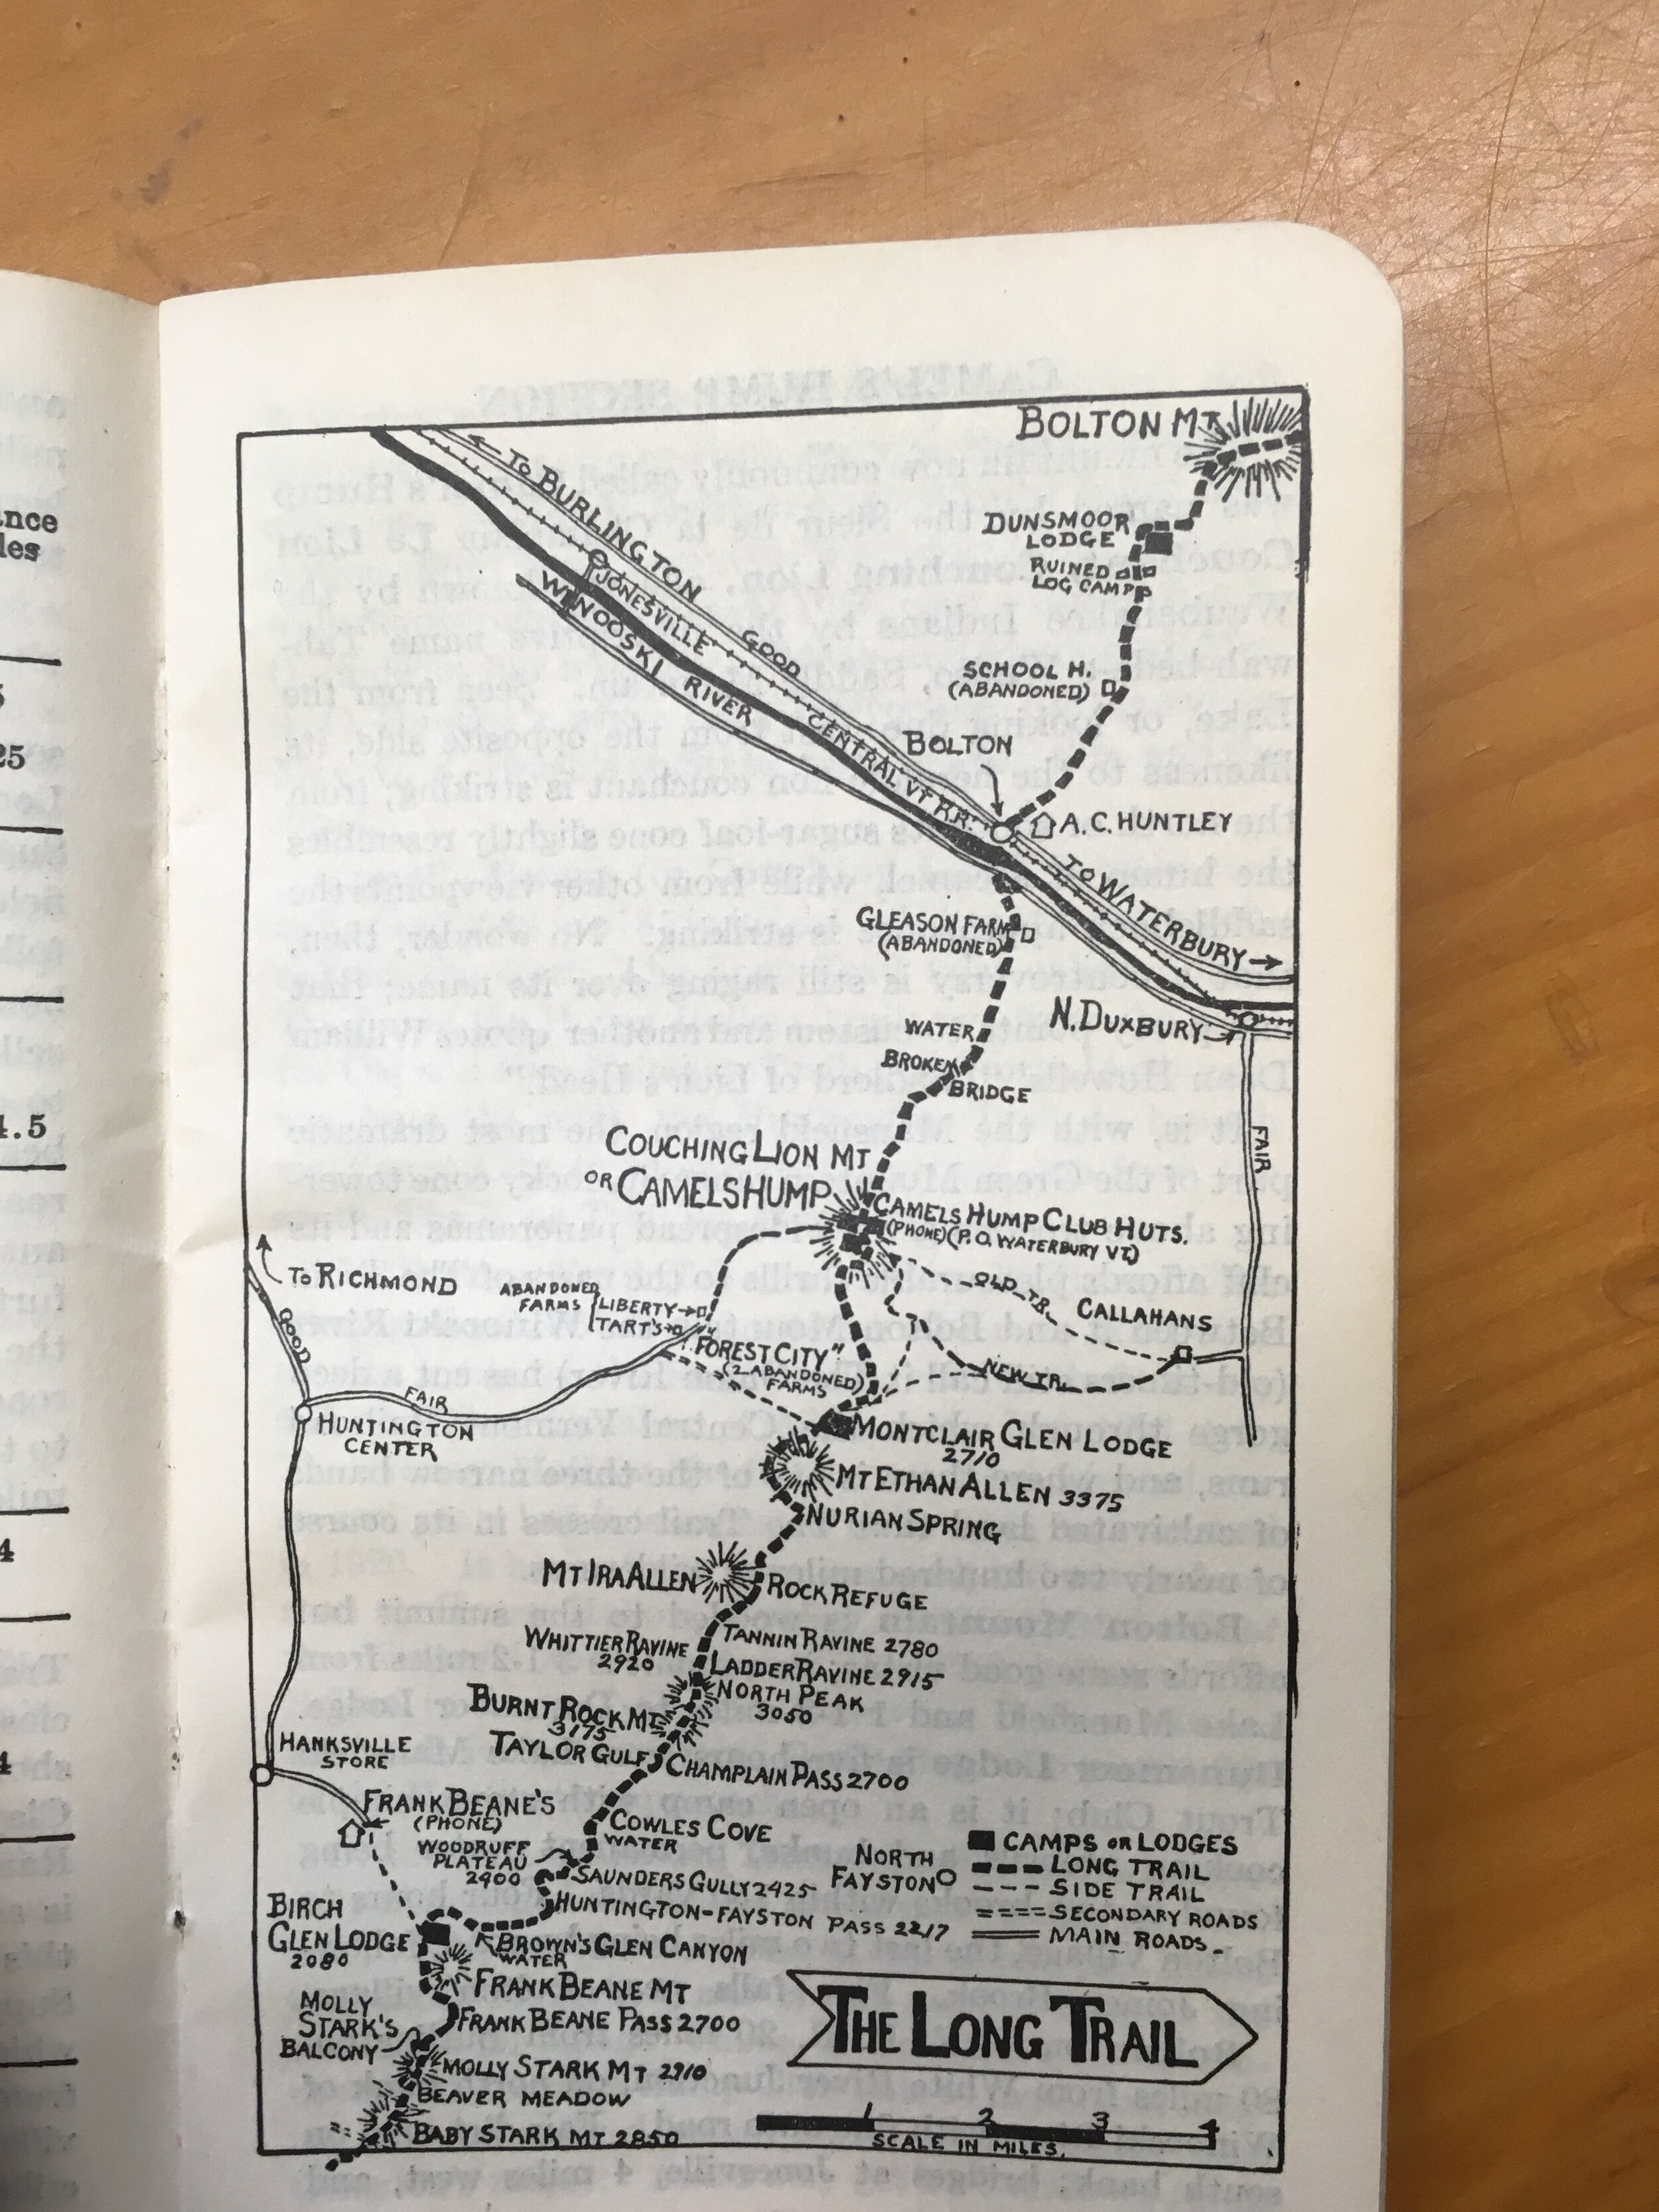   Map of the Long Trail from an early edition of  The Long Trail Guide  (Green Mountain Club Archives).  